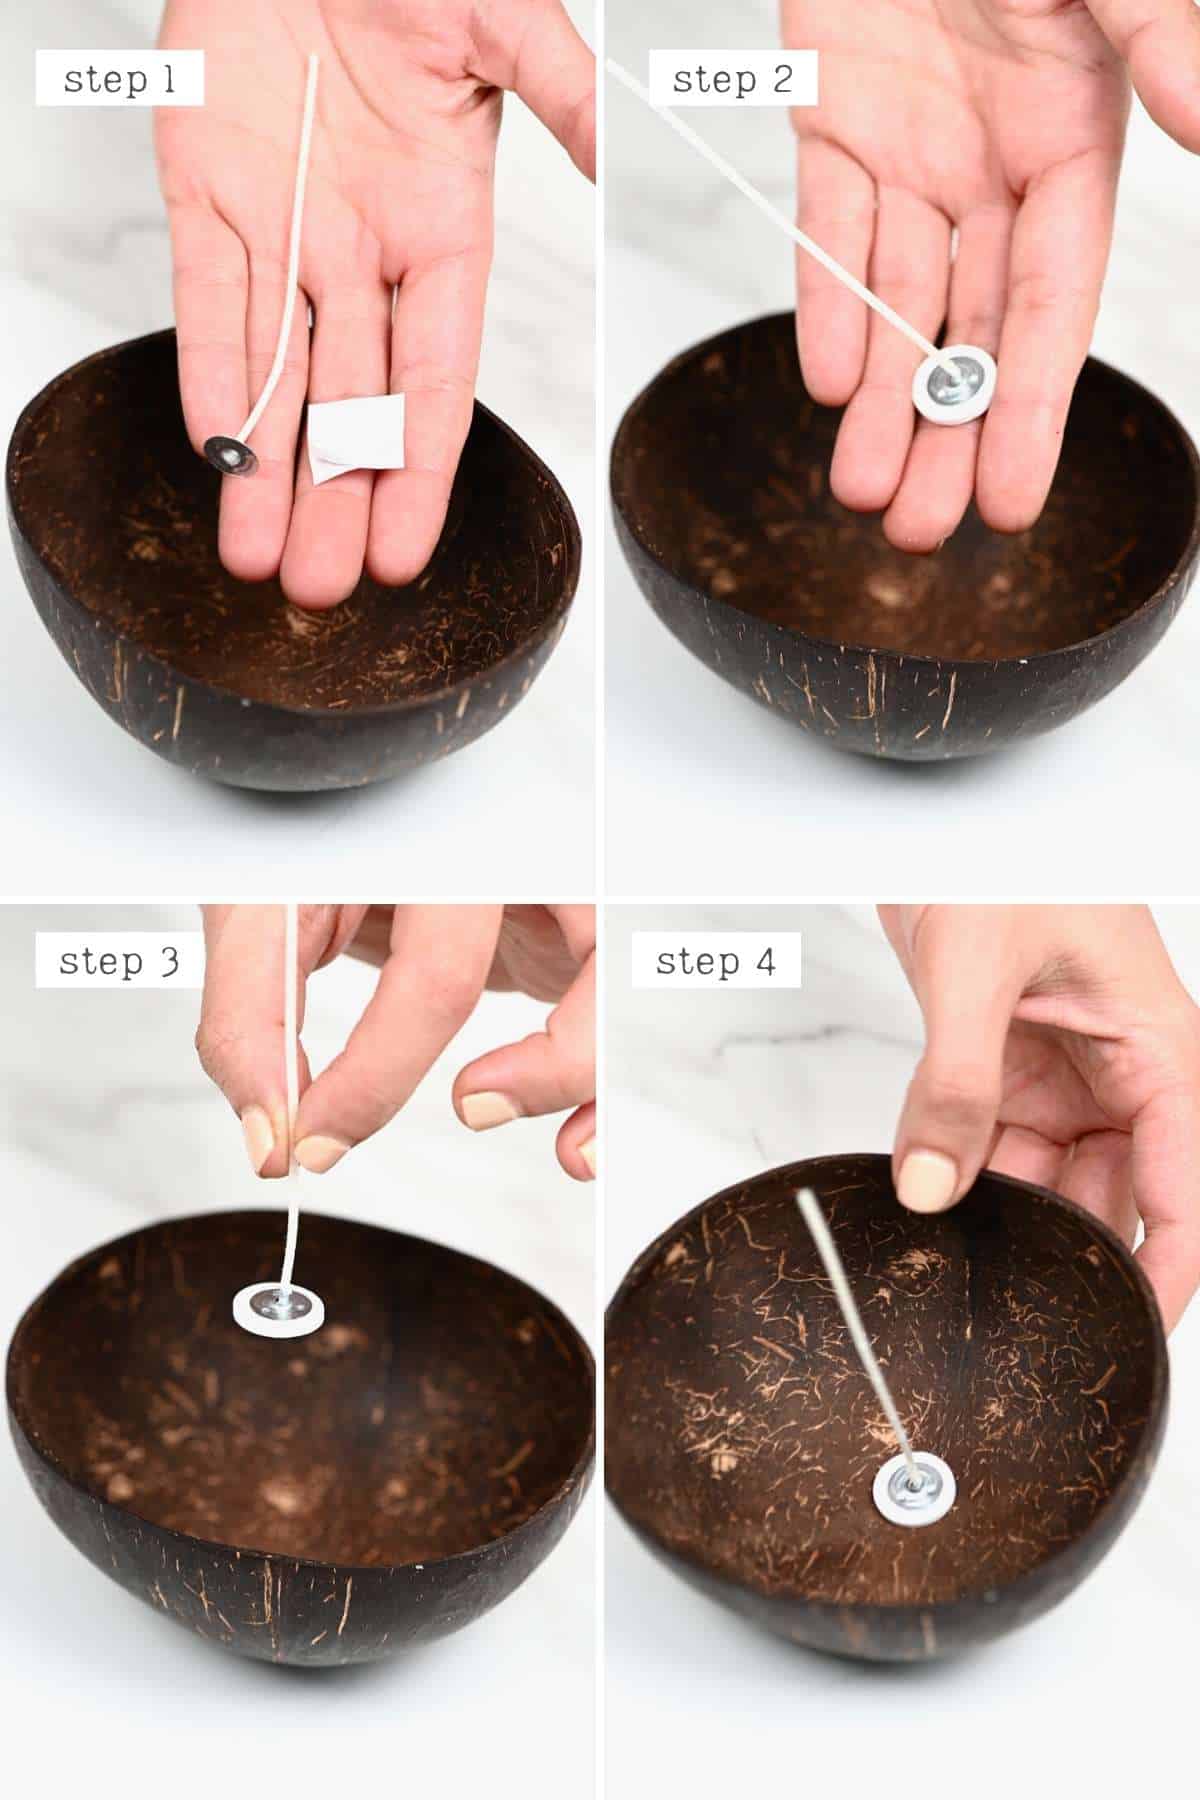 Steps for attaching candle wick